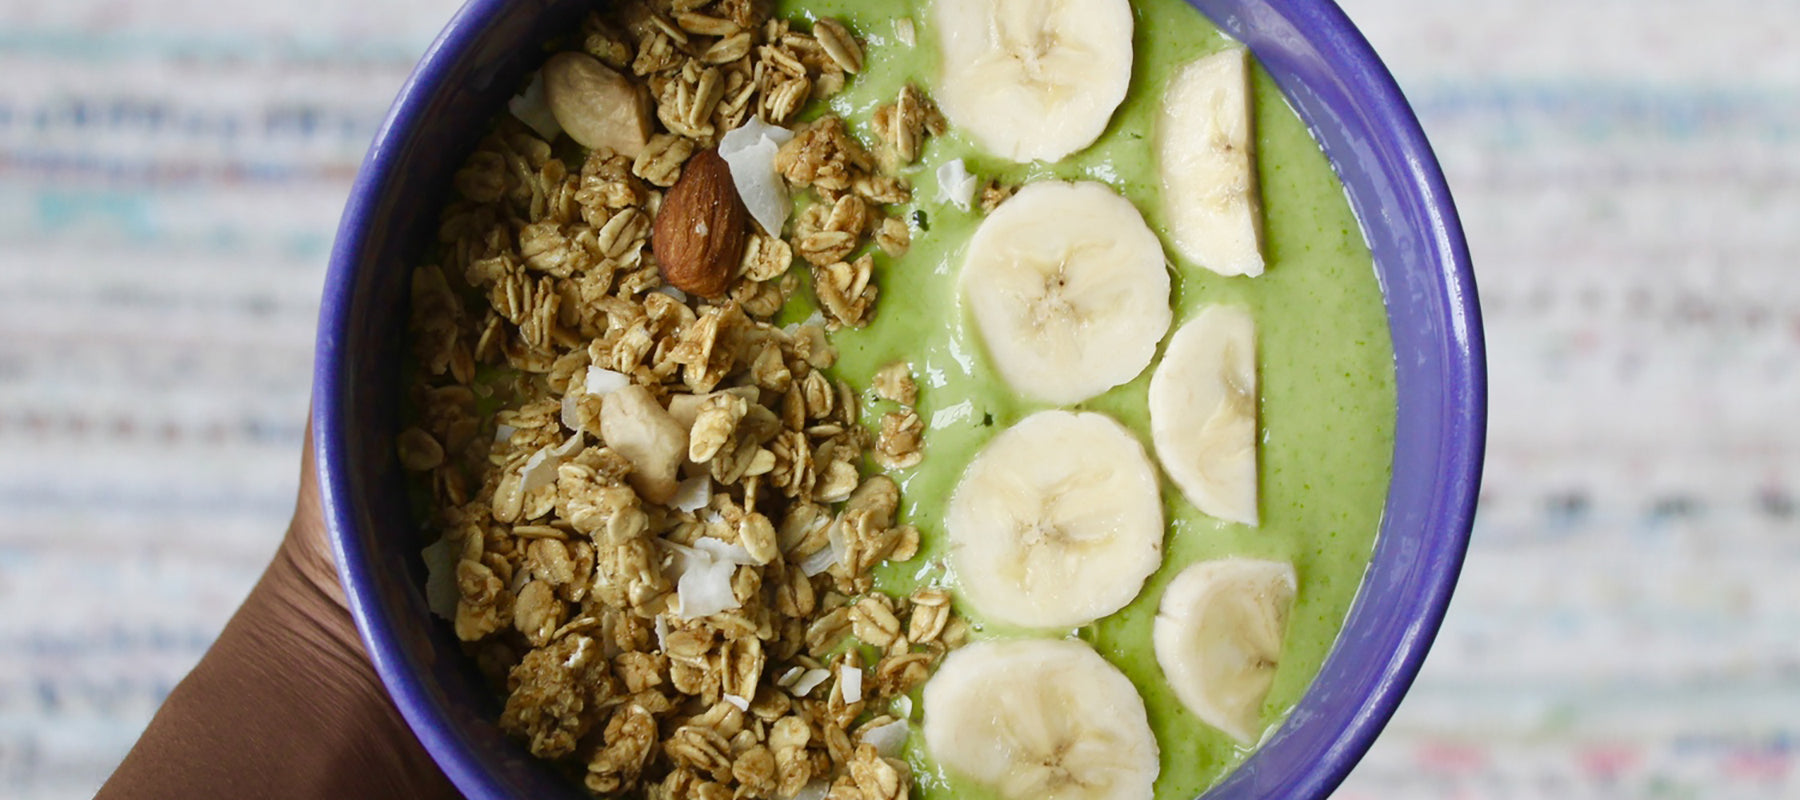 Green Smoothie Bowl with Bananas